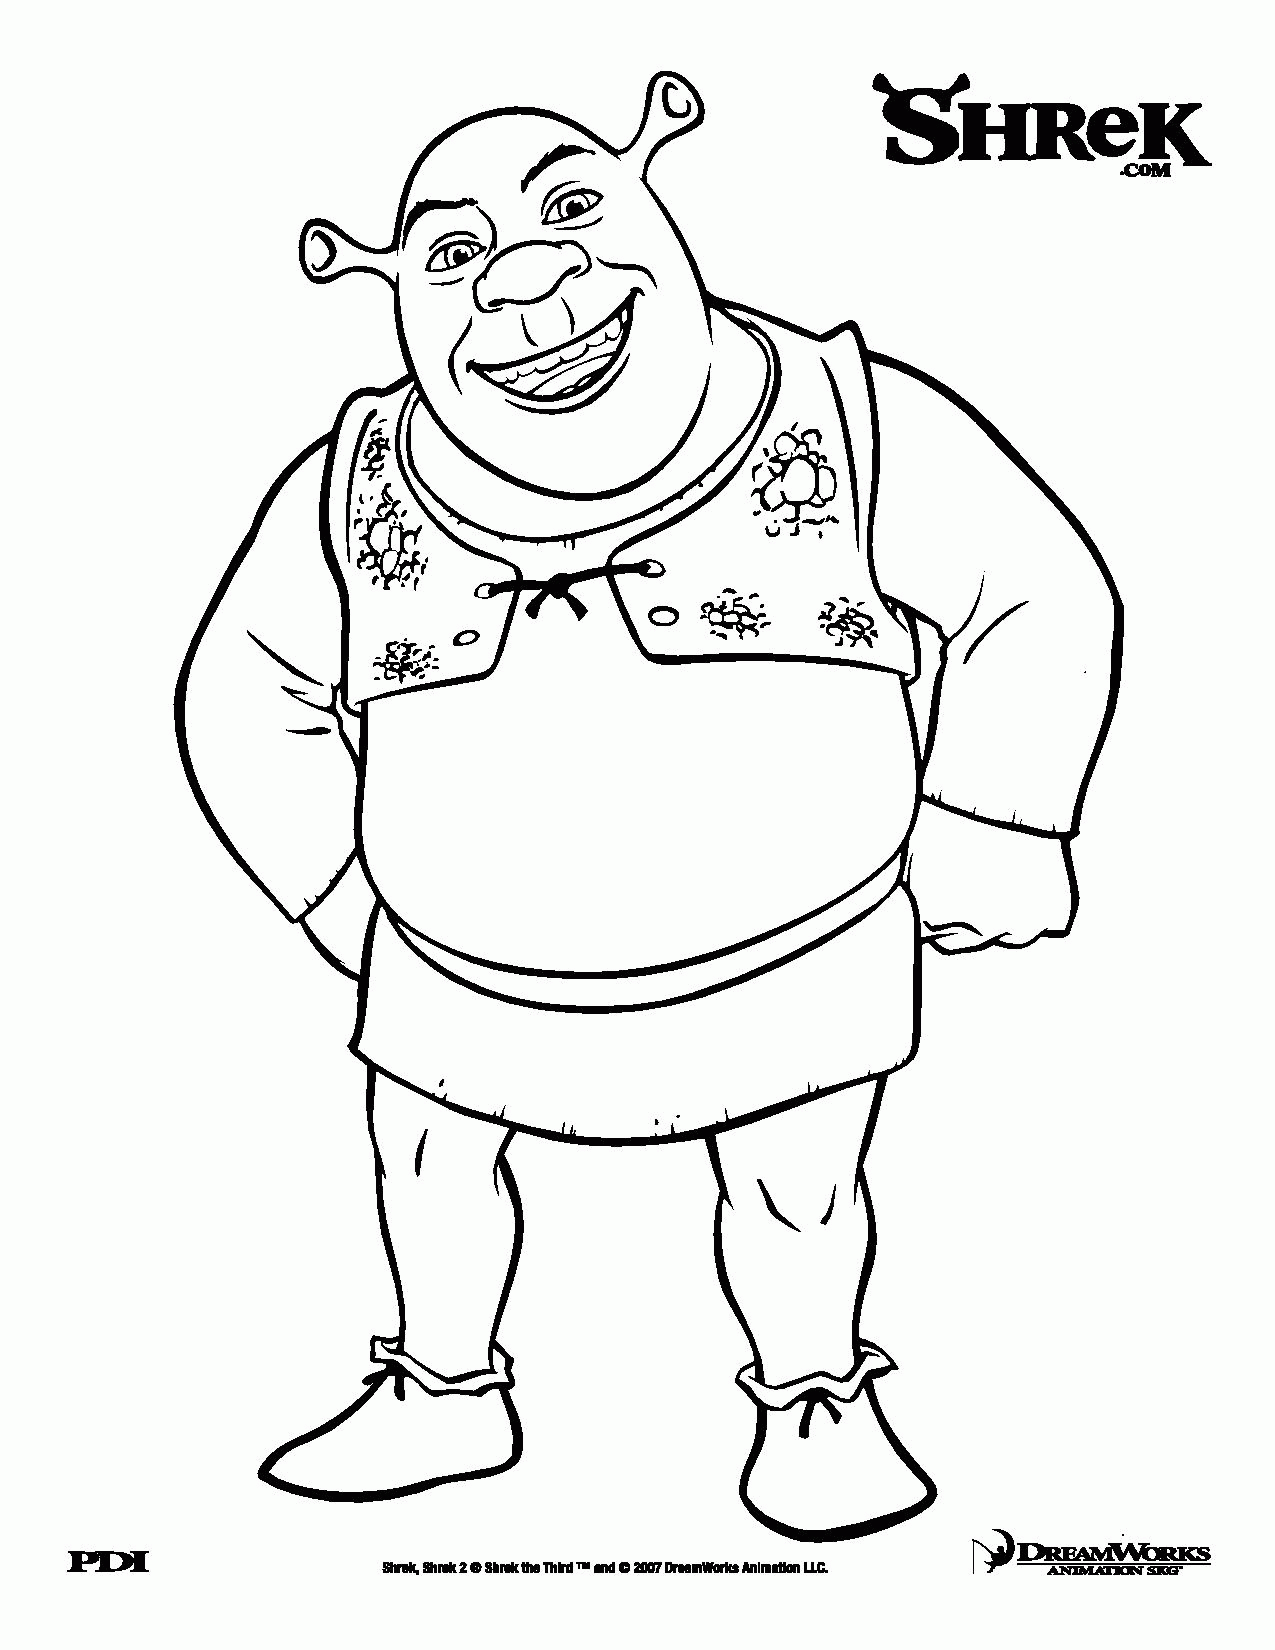 Free Shrek With Babies Coloring Pages, Download Free Shrek With Babies